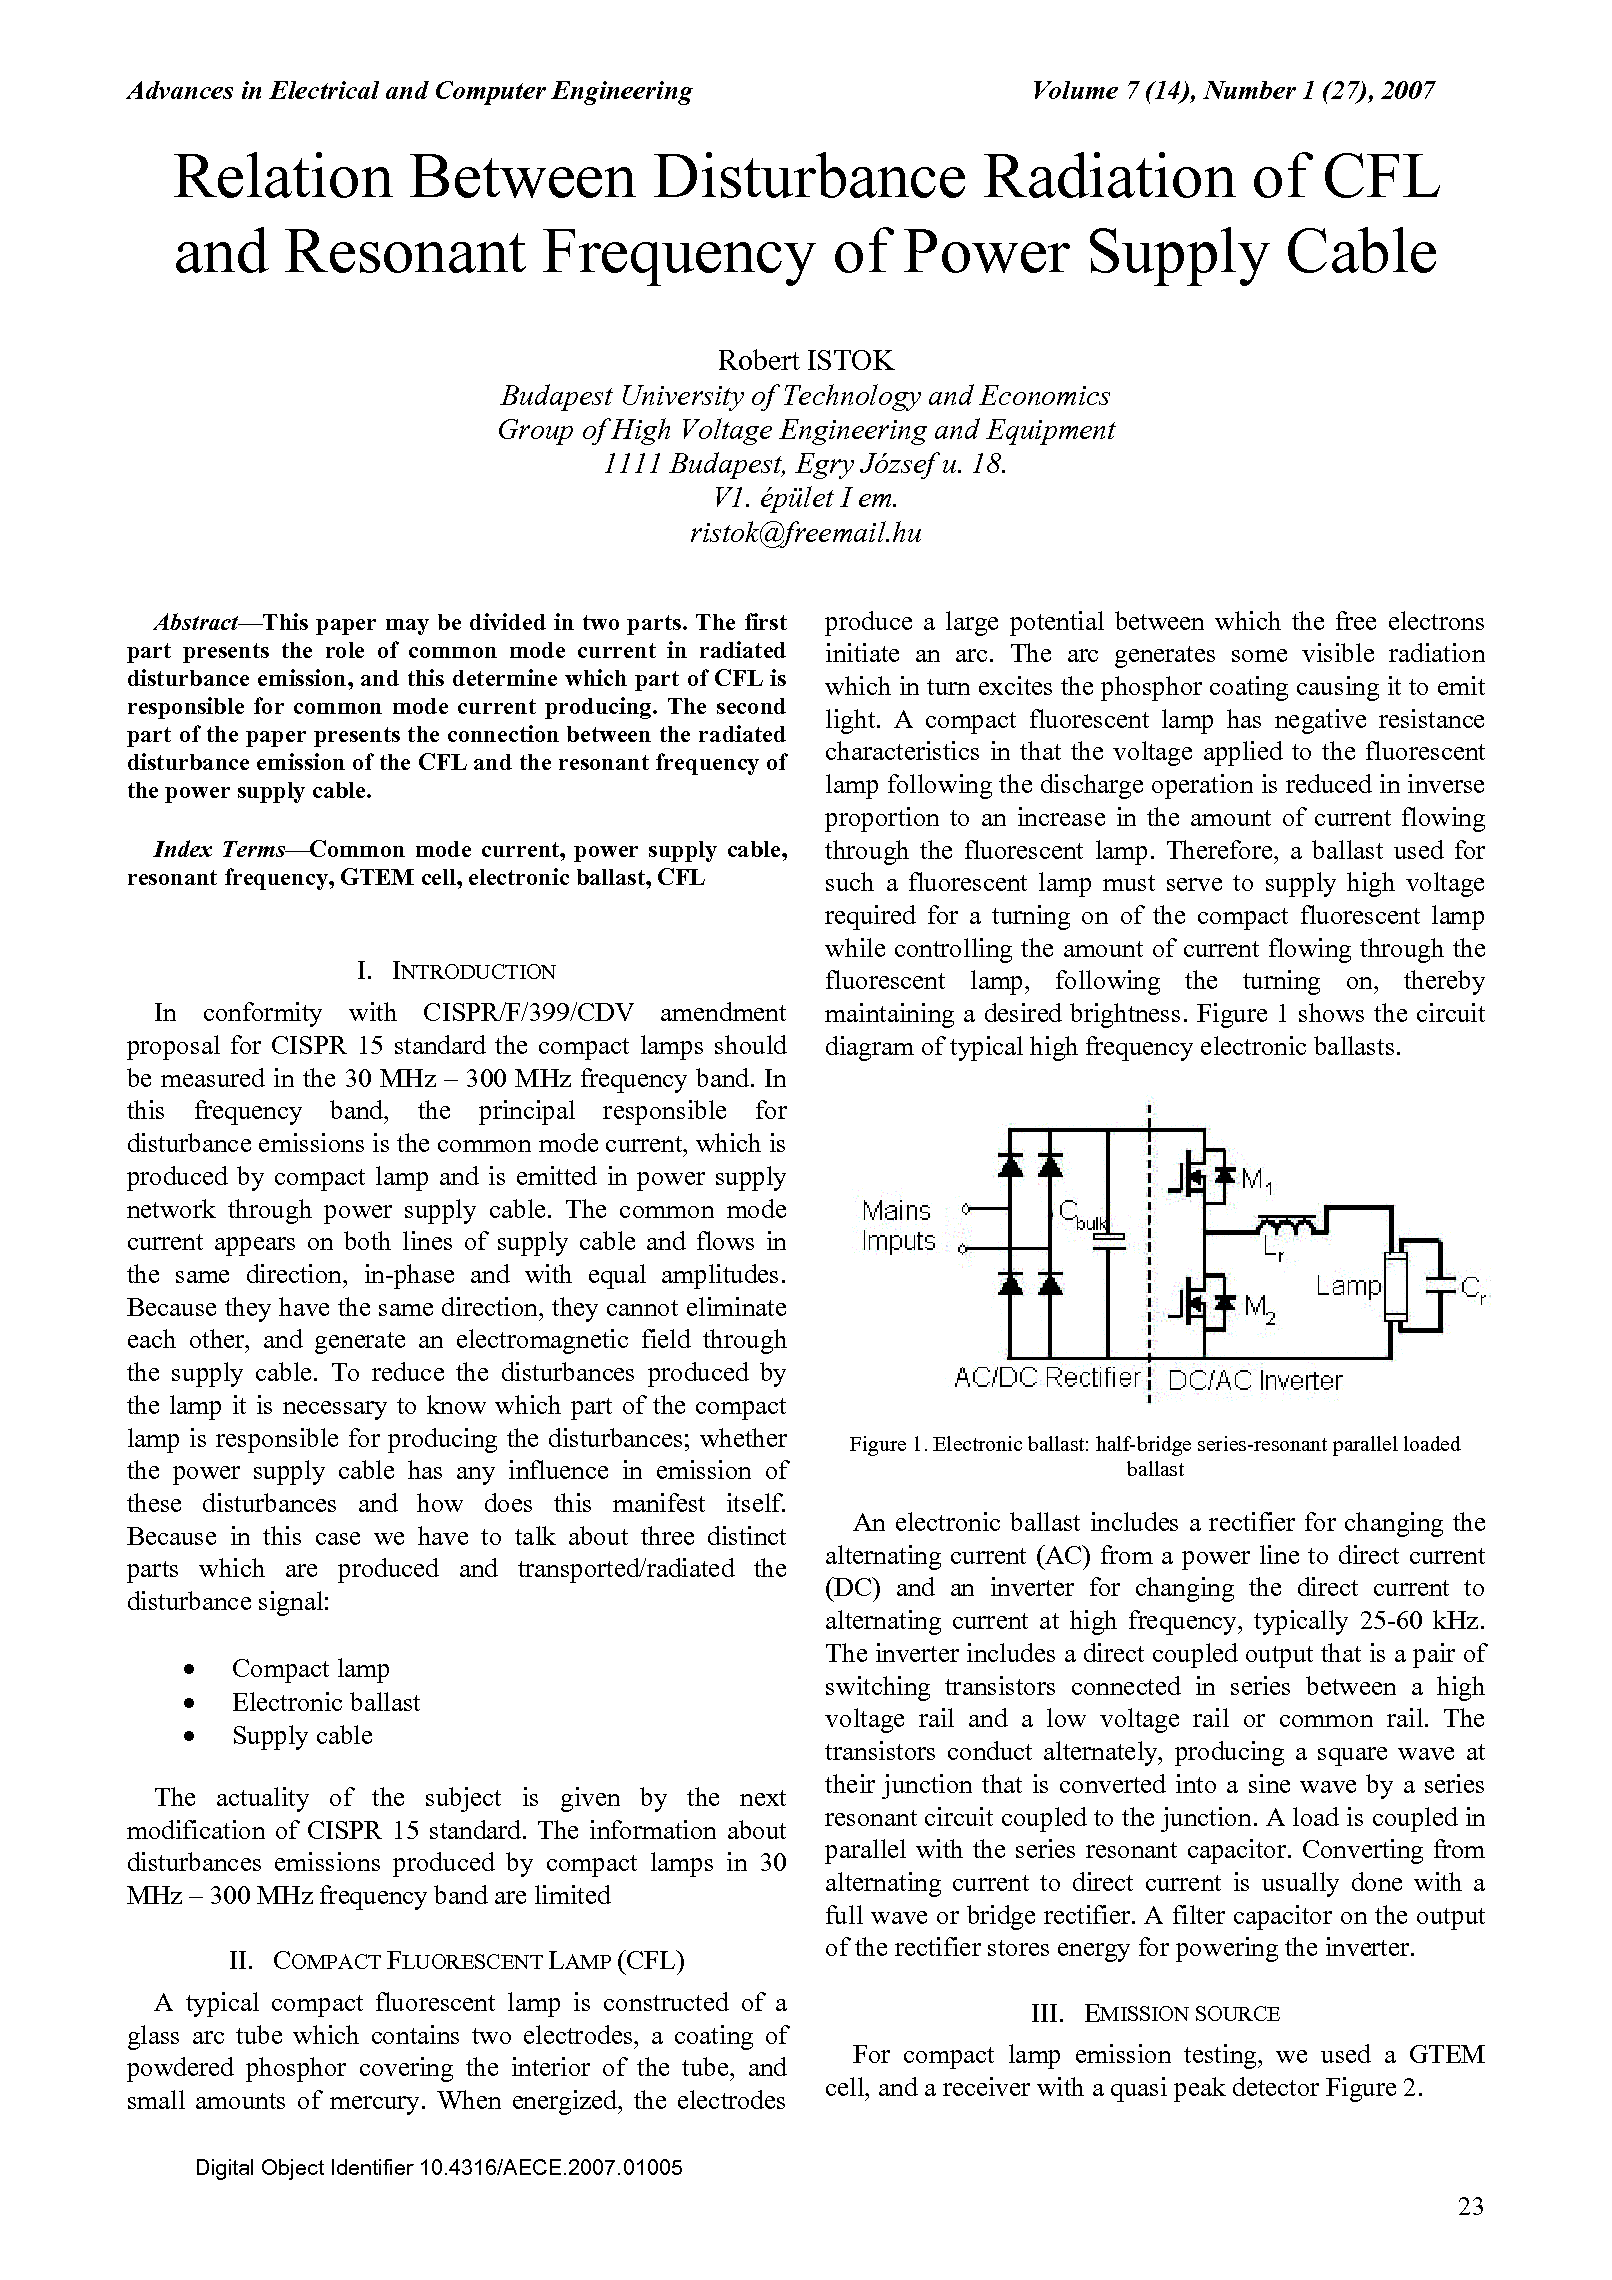 PDF Quickview for paper with DOI:10.4316/AECE.2007.01005